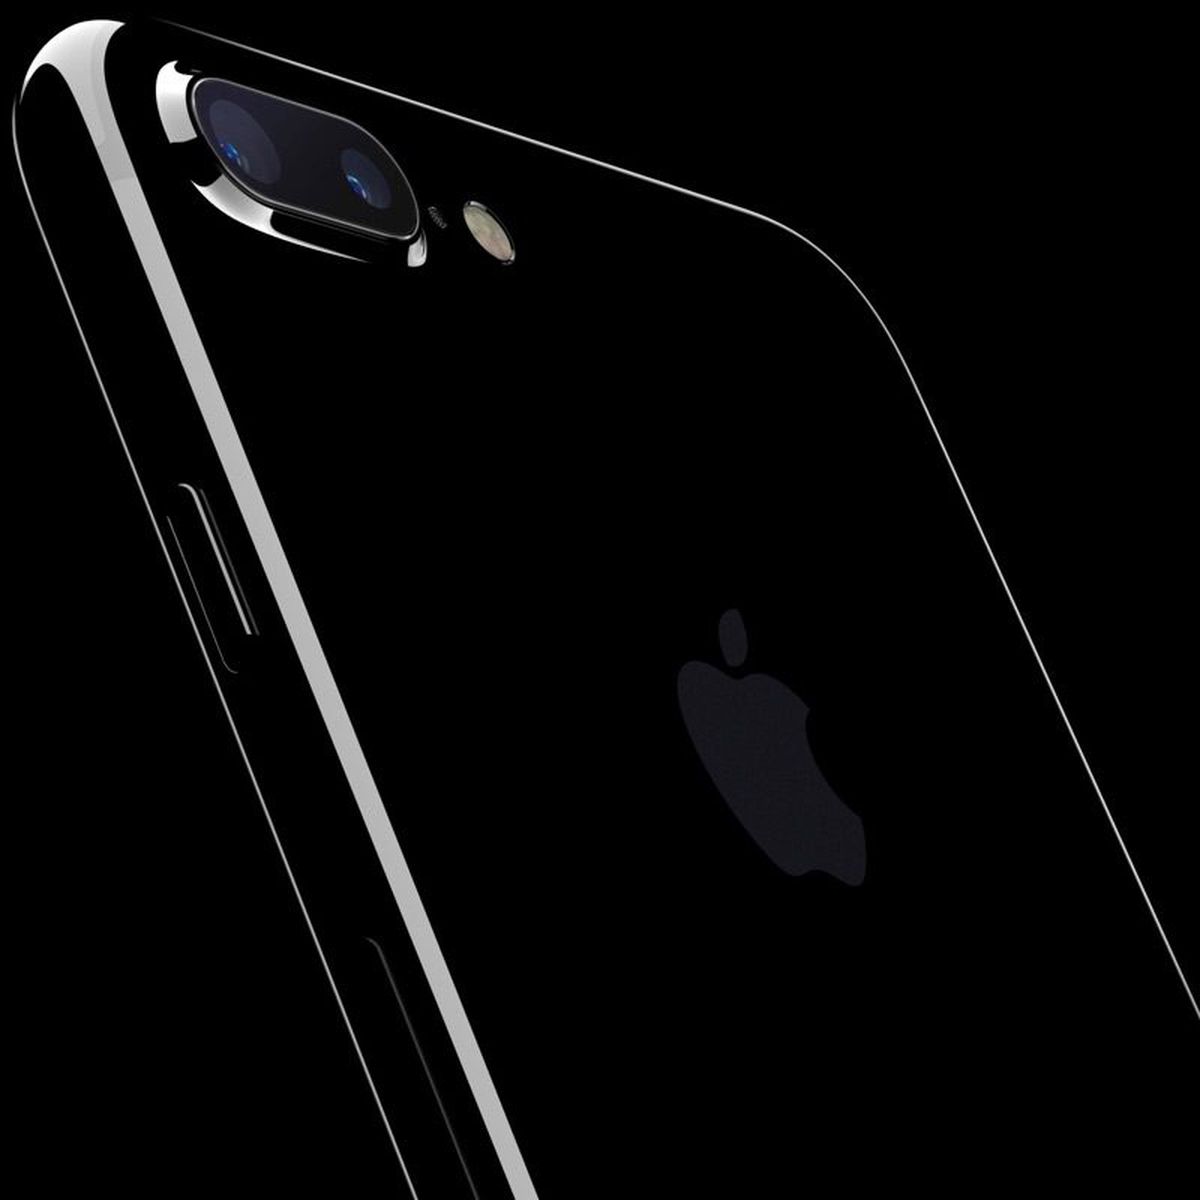 verzekering Necklet zonne iPhone 7: Everything we know